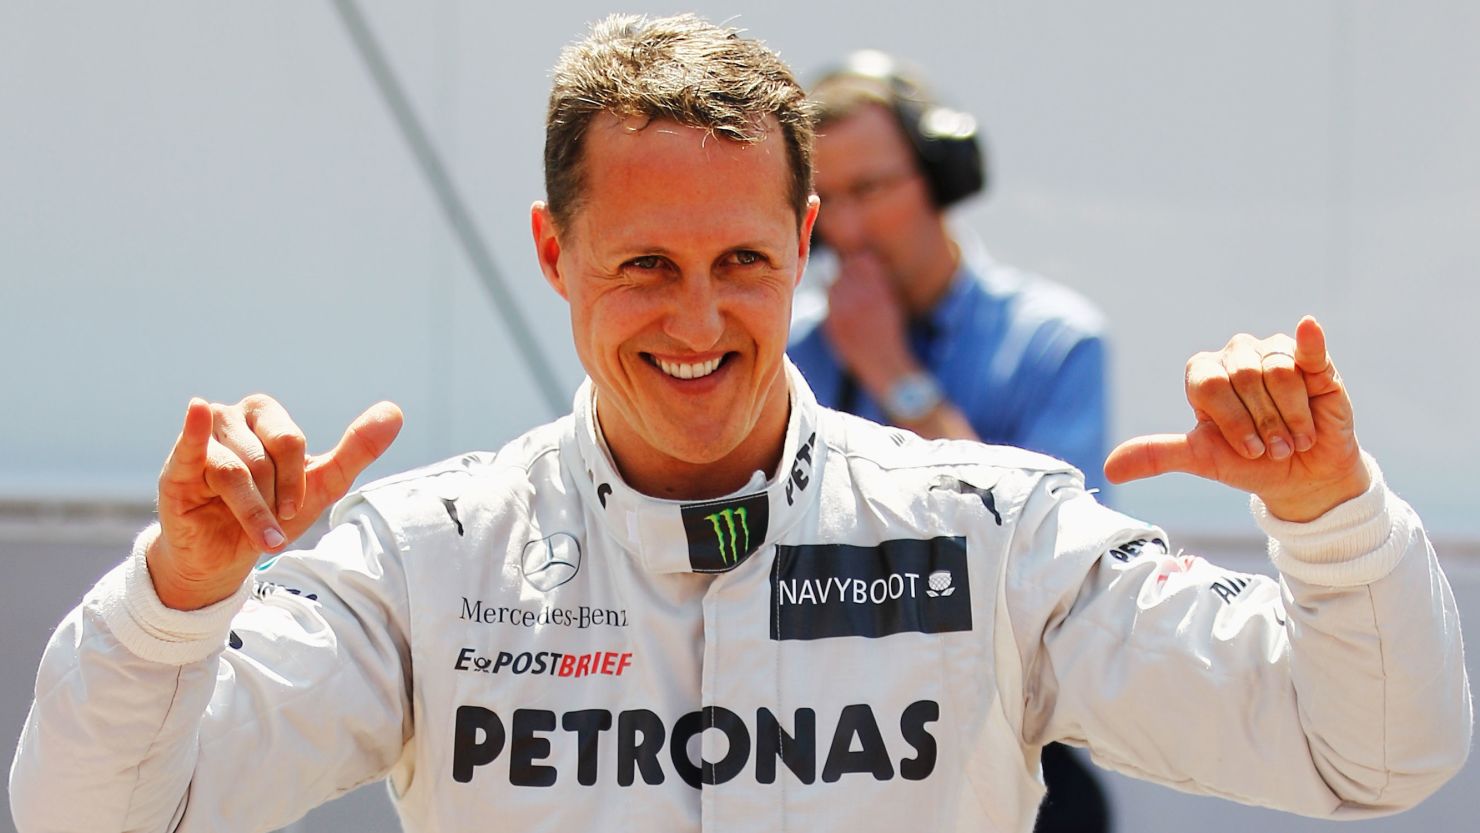 Mercedes' veteran driver Michael Schumacher has collected 68 pole positions in his Formula One career.